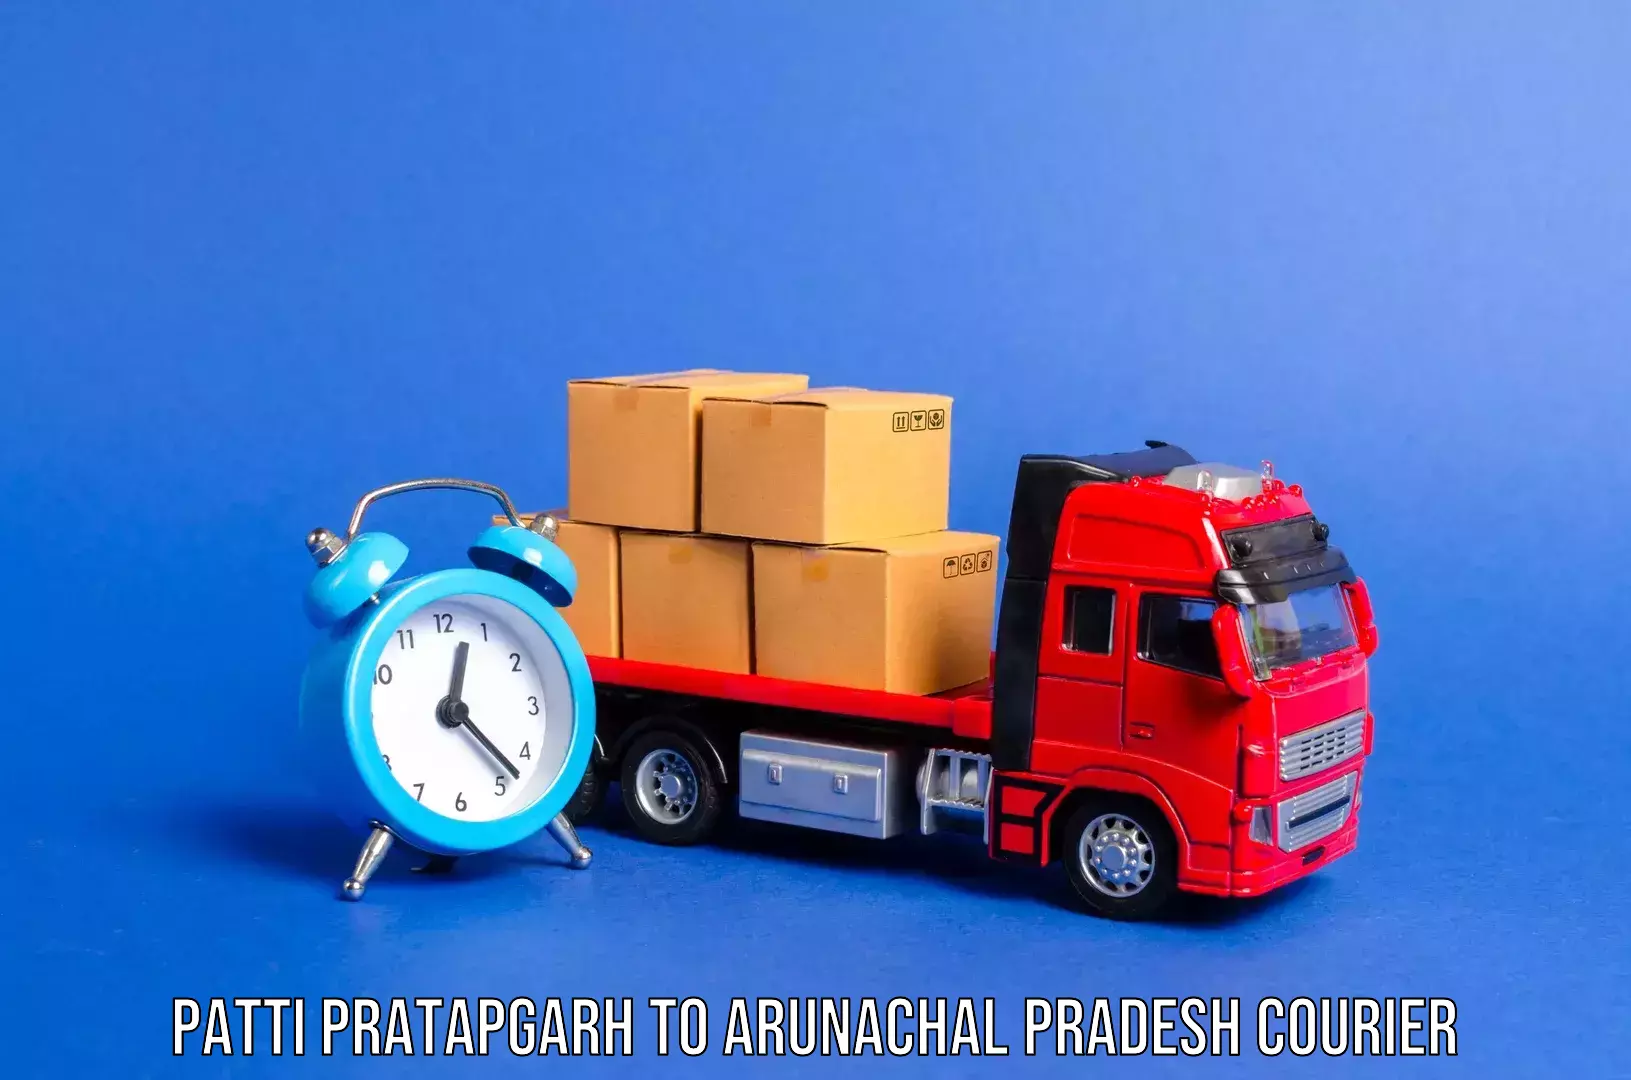 Luggage transport consultancy Patti Pratapgarh to West Siang